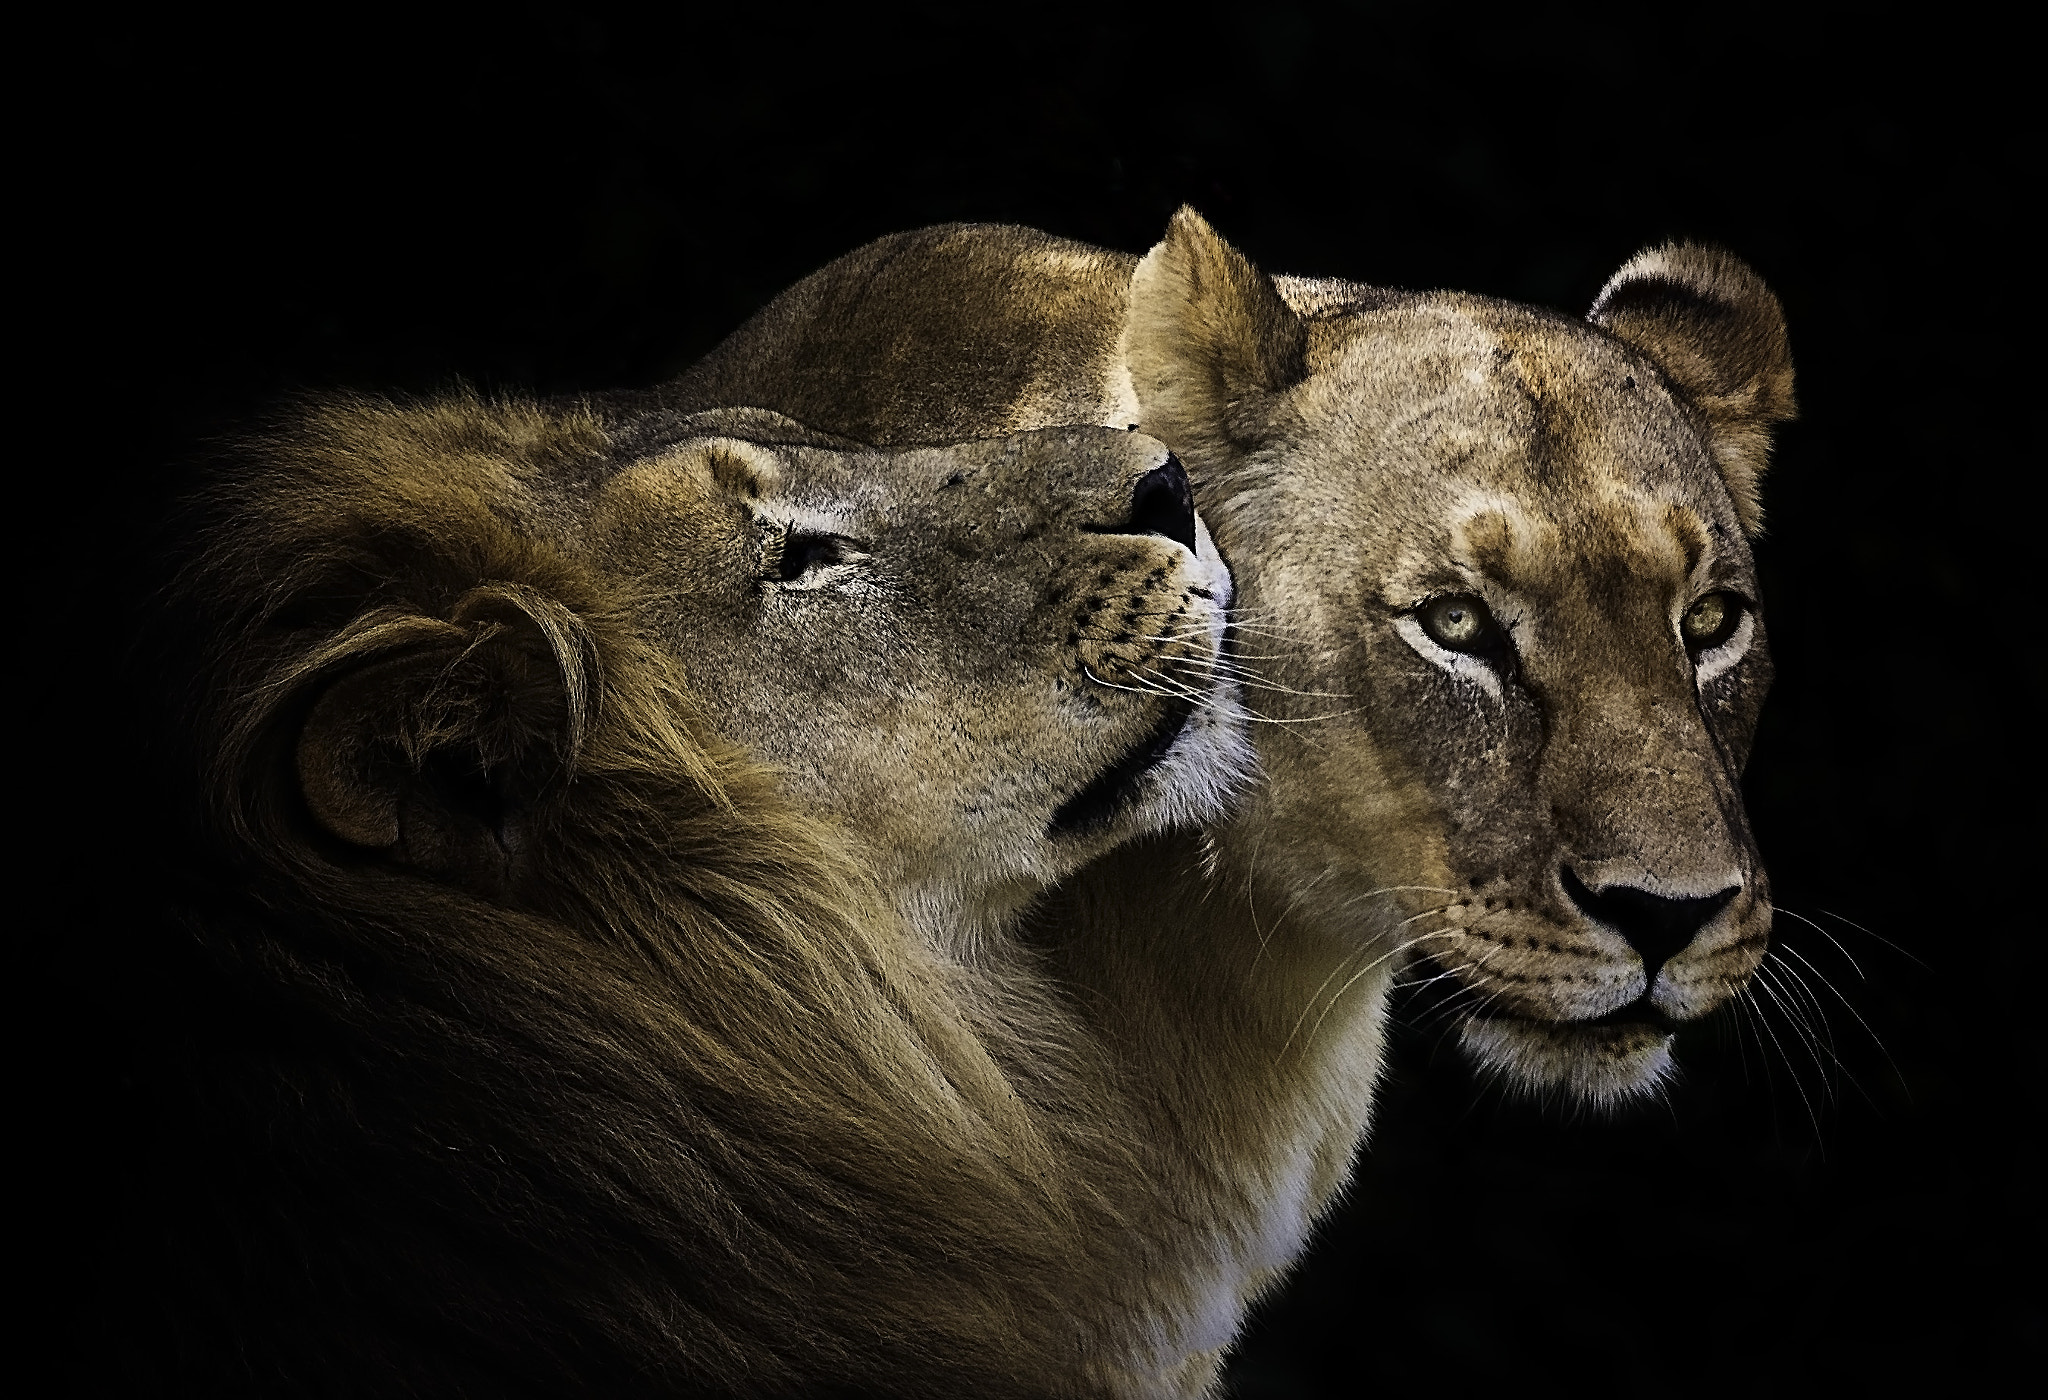 Nikon D610 + Sigma 150-600mm F5-6.3 DG OS HSM | S sample photo. To love the lioness photography